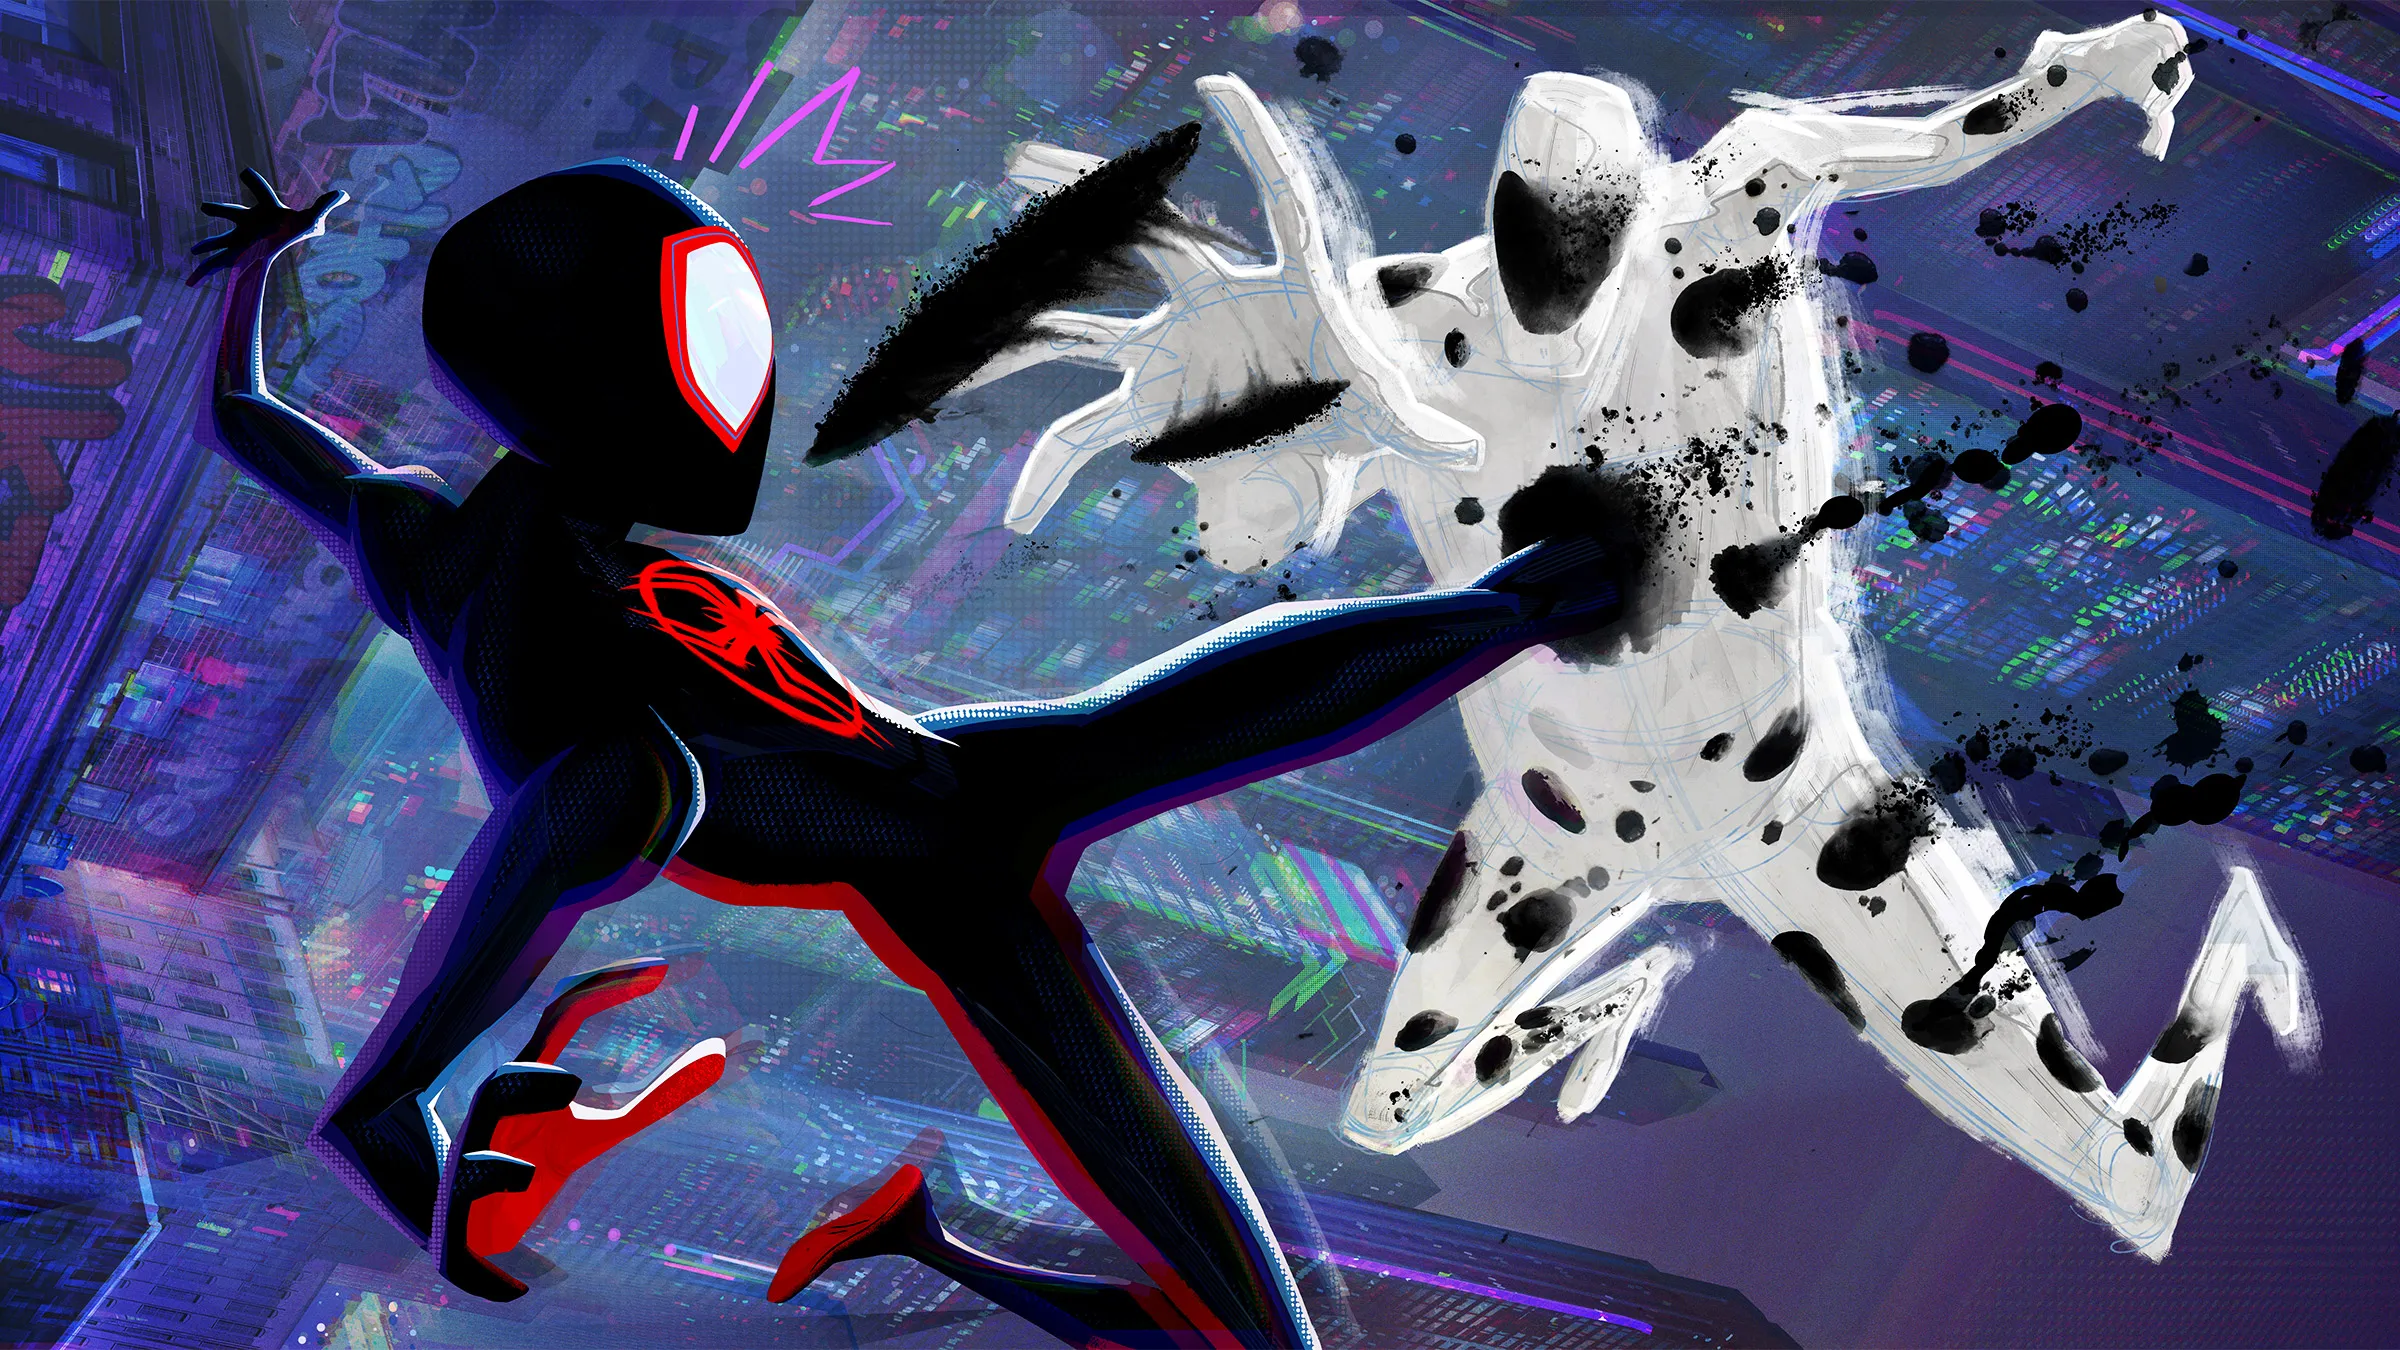 Challenges in the Making of "Across the Spider-Verse" Highlight Animation Industry Struggles